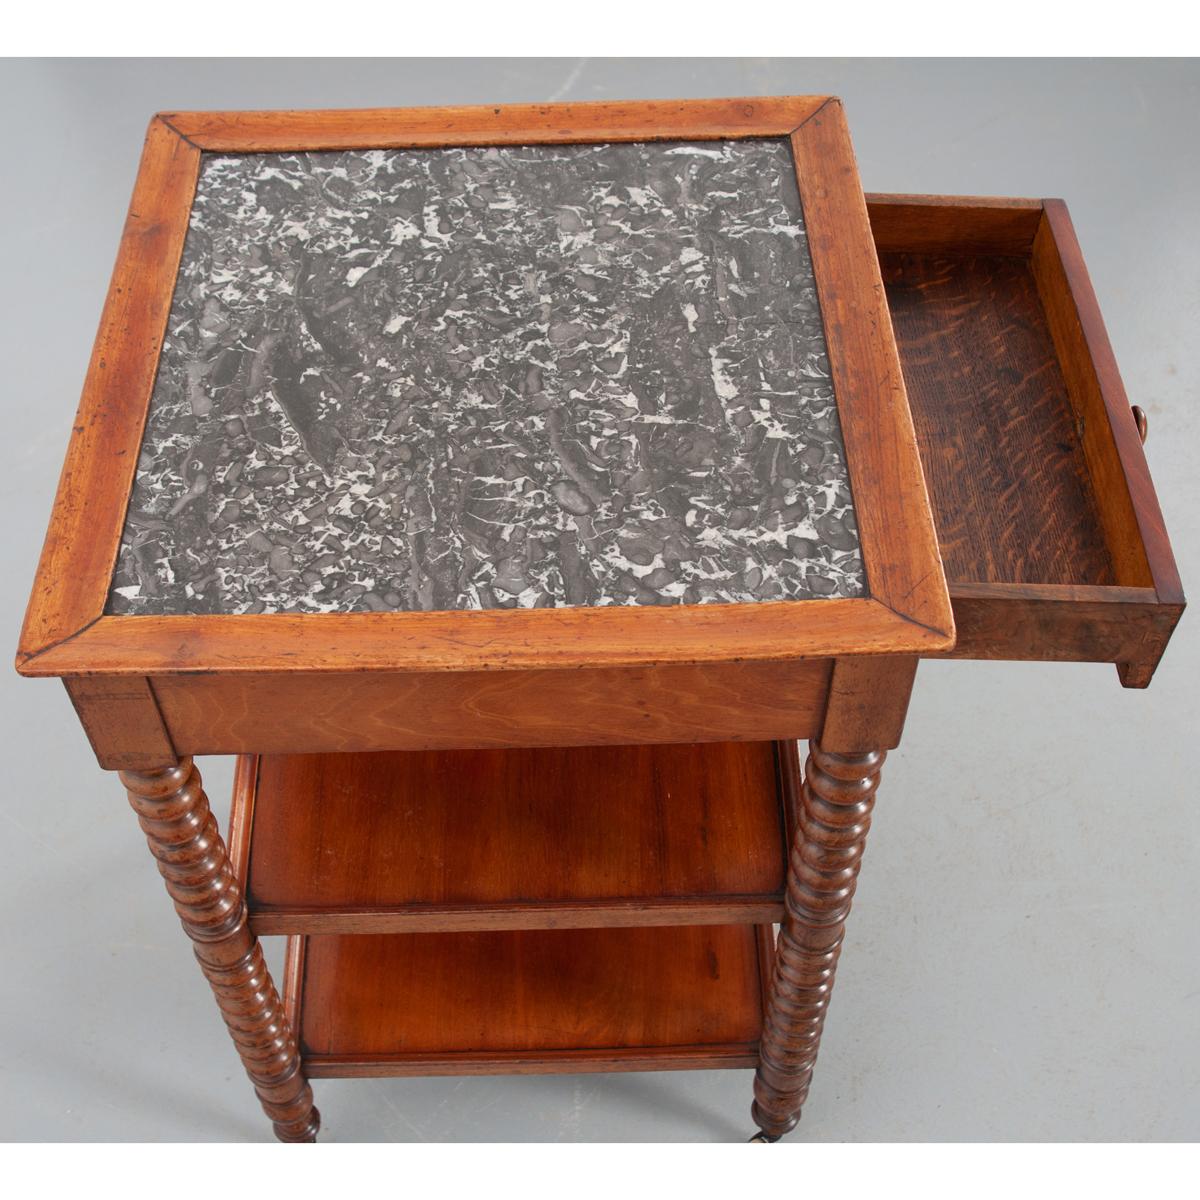 A fantastic three-tiered mahogany side table with marble top, made in France. The black and white marble-top is framed in molded trim. The apron houses a single drawer with a turned knob. Two shelves found below are also framed in molded trim and